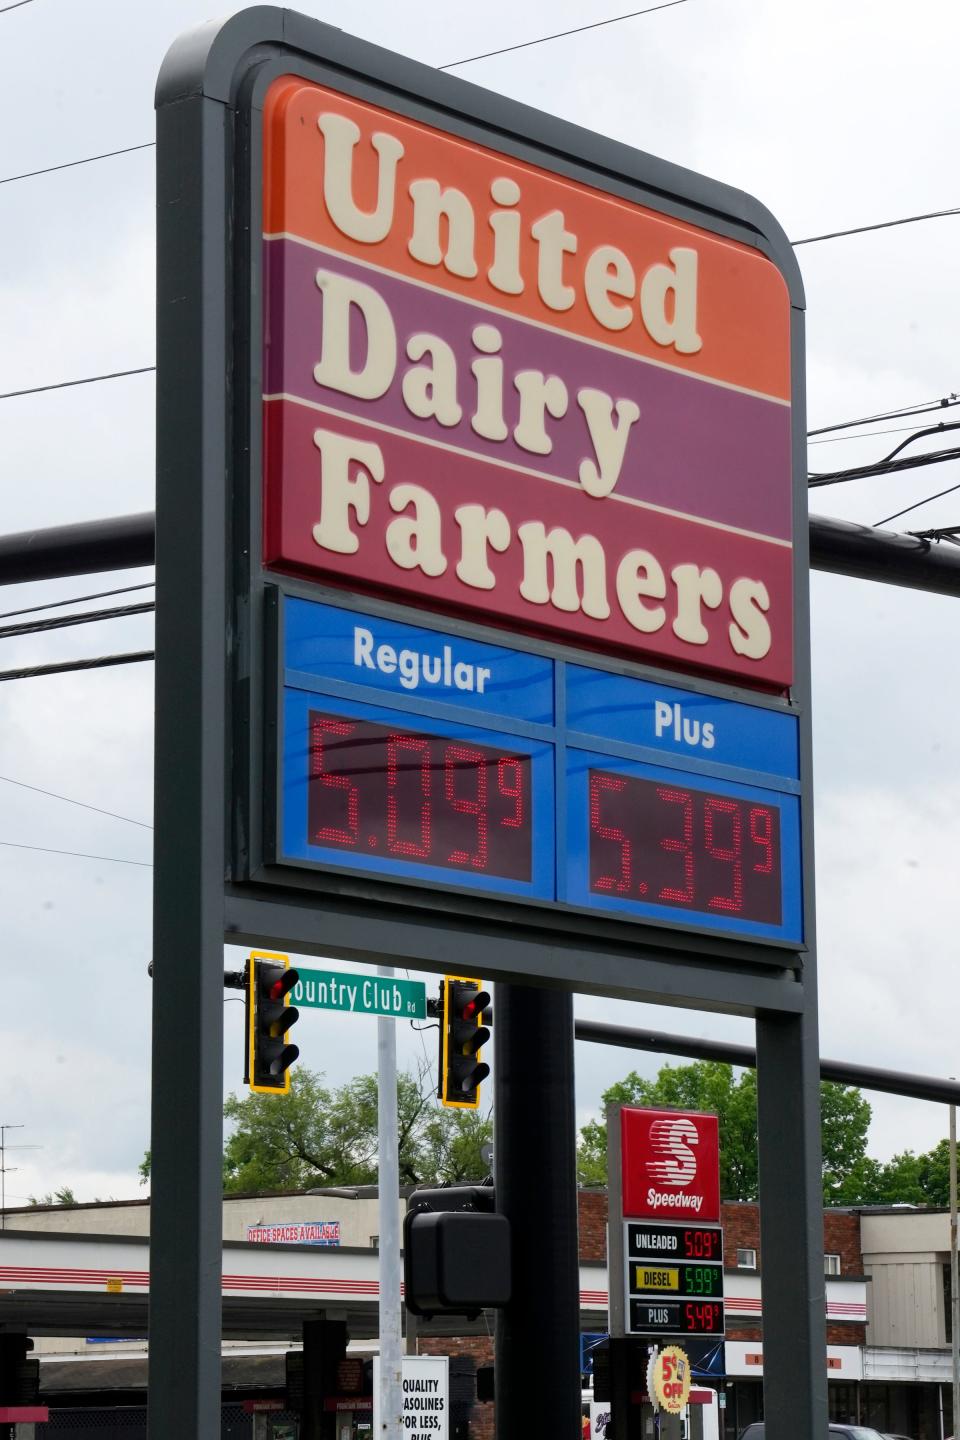 Gas prices were $5.09 on the East side of Columbus on Tuesday, June 7. Columbus saw record-setting prices this summer, but prices have recently fallen.